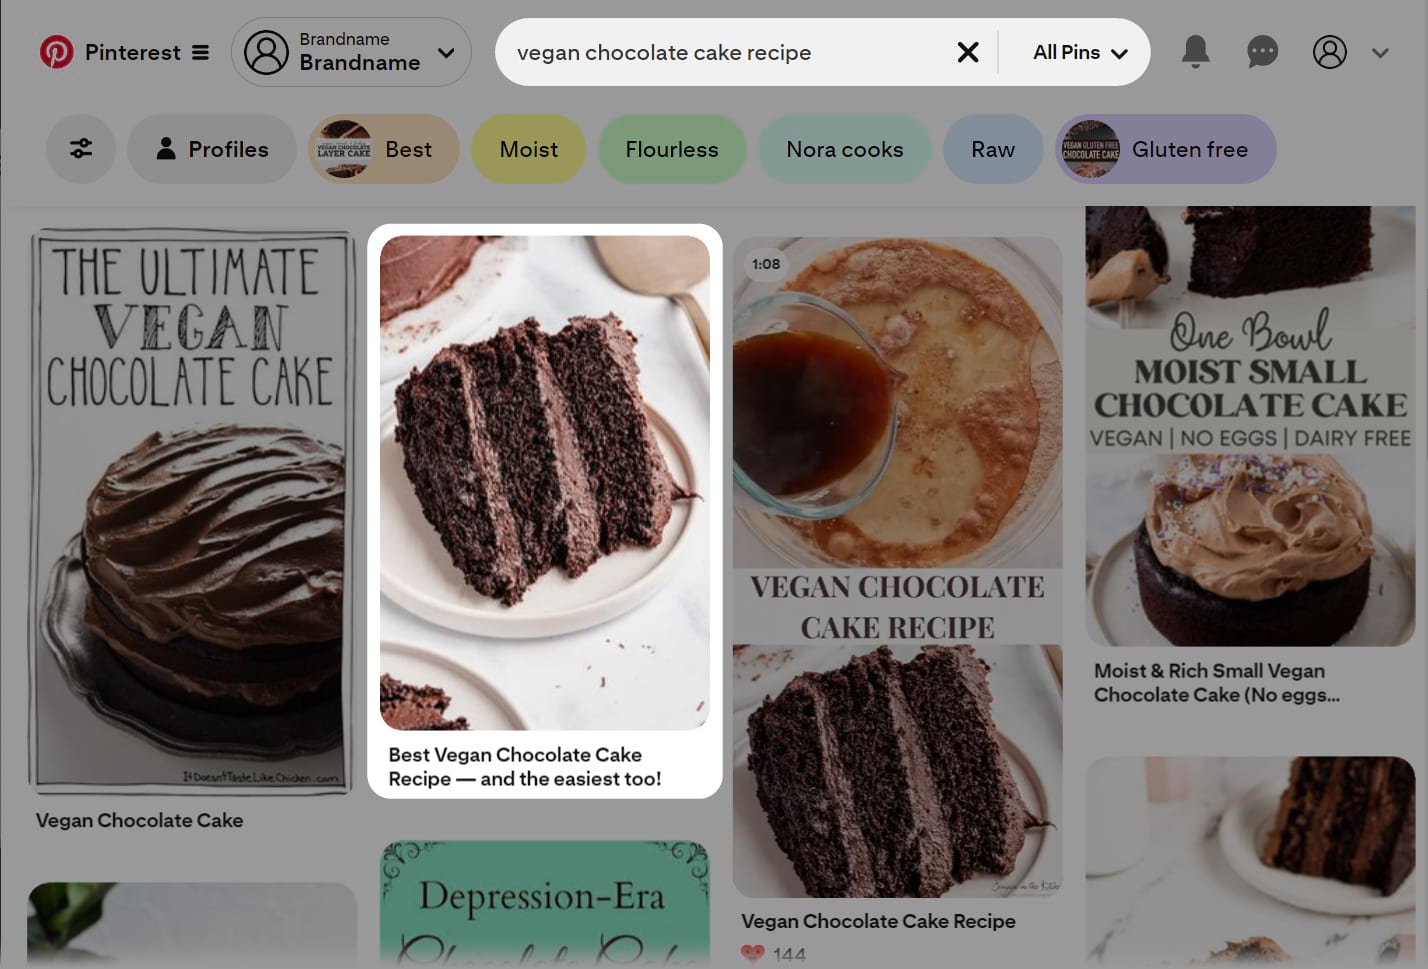 Pinterest search results for “vegan chocolate cake recipe” showing keyword-optimized titles.